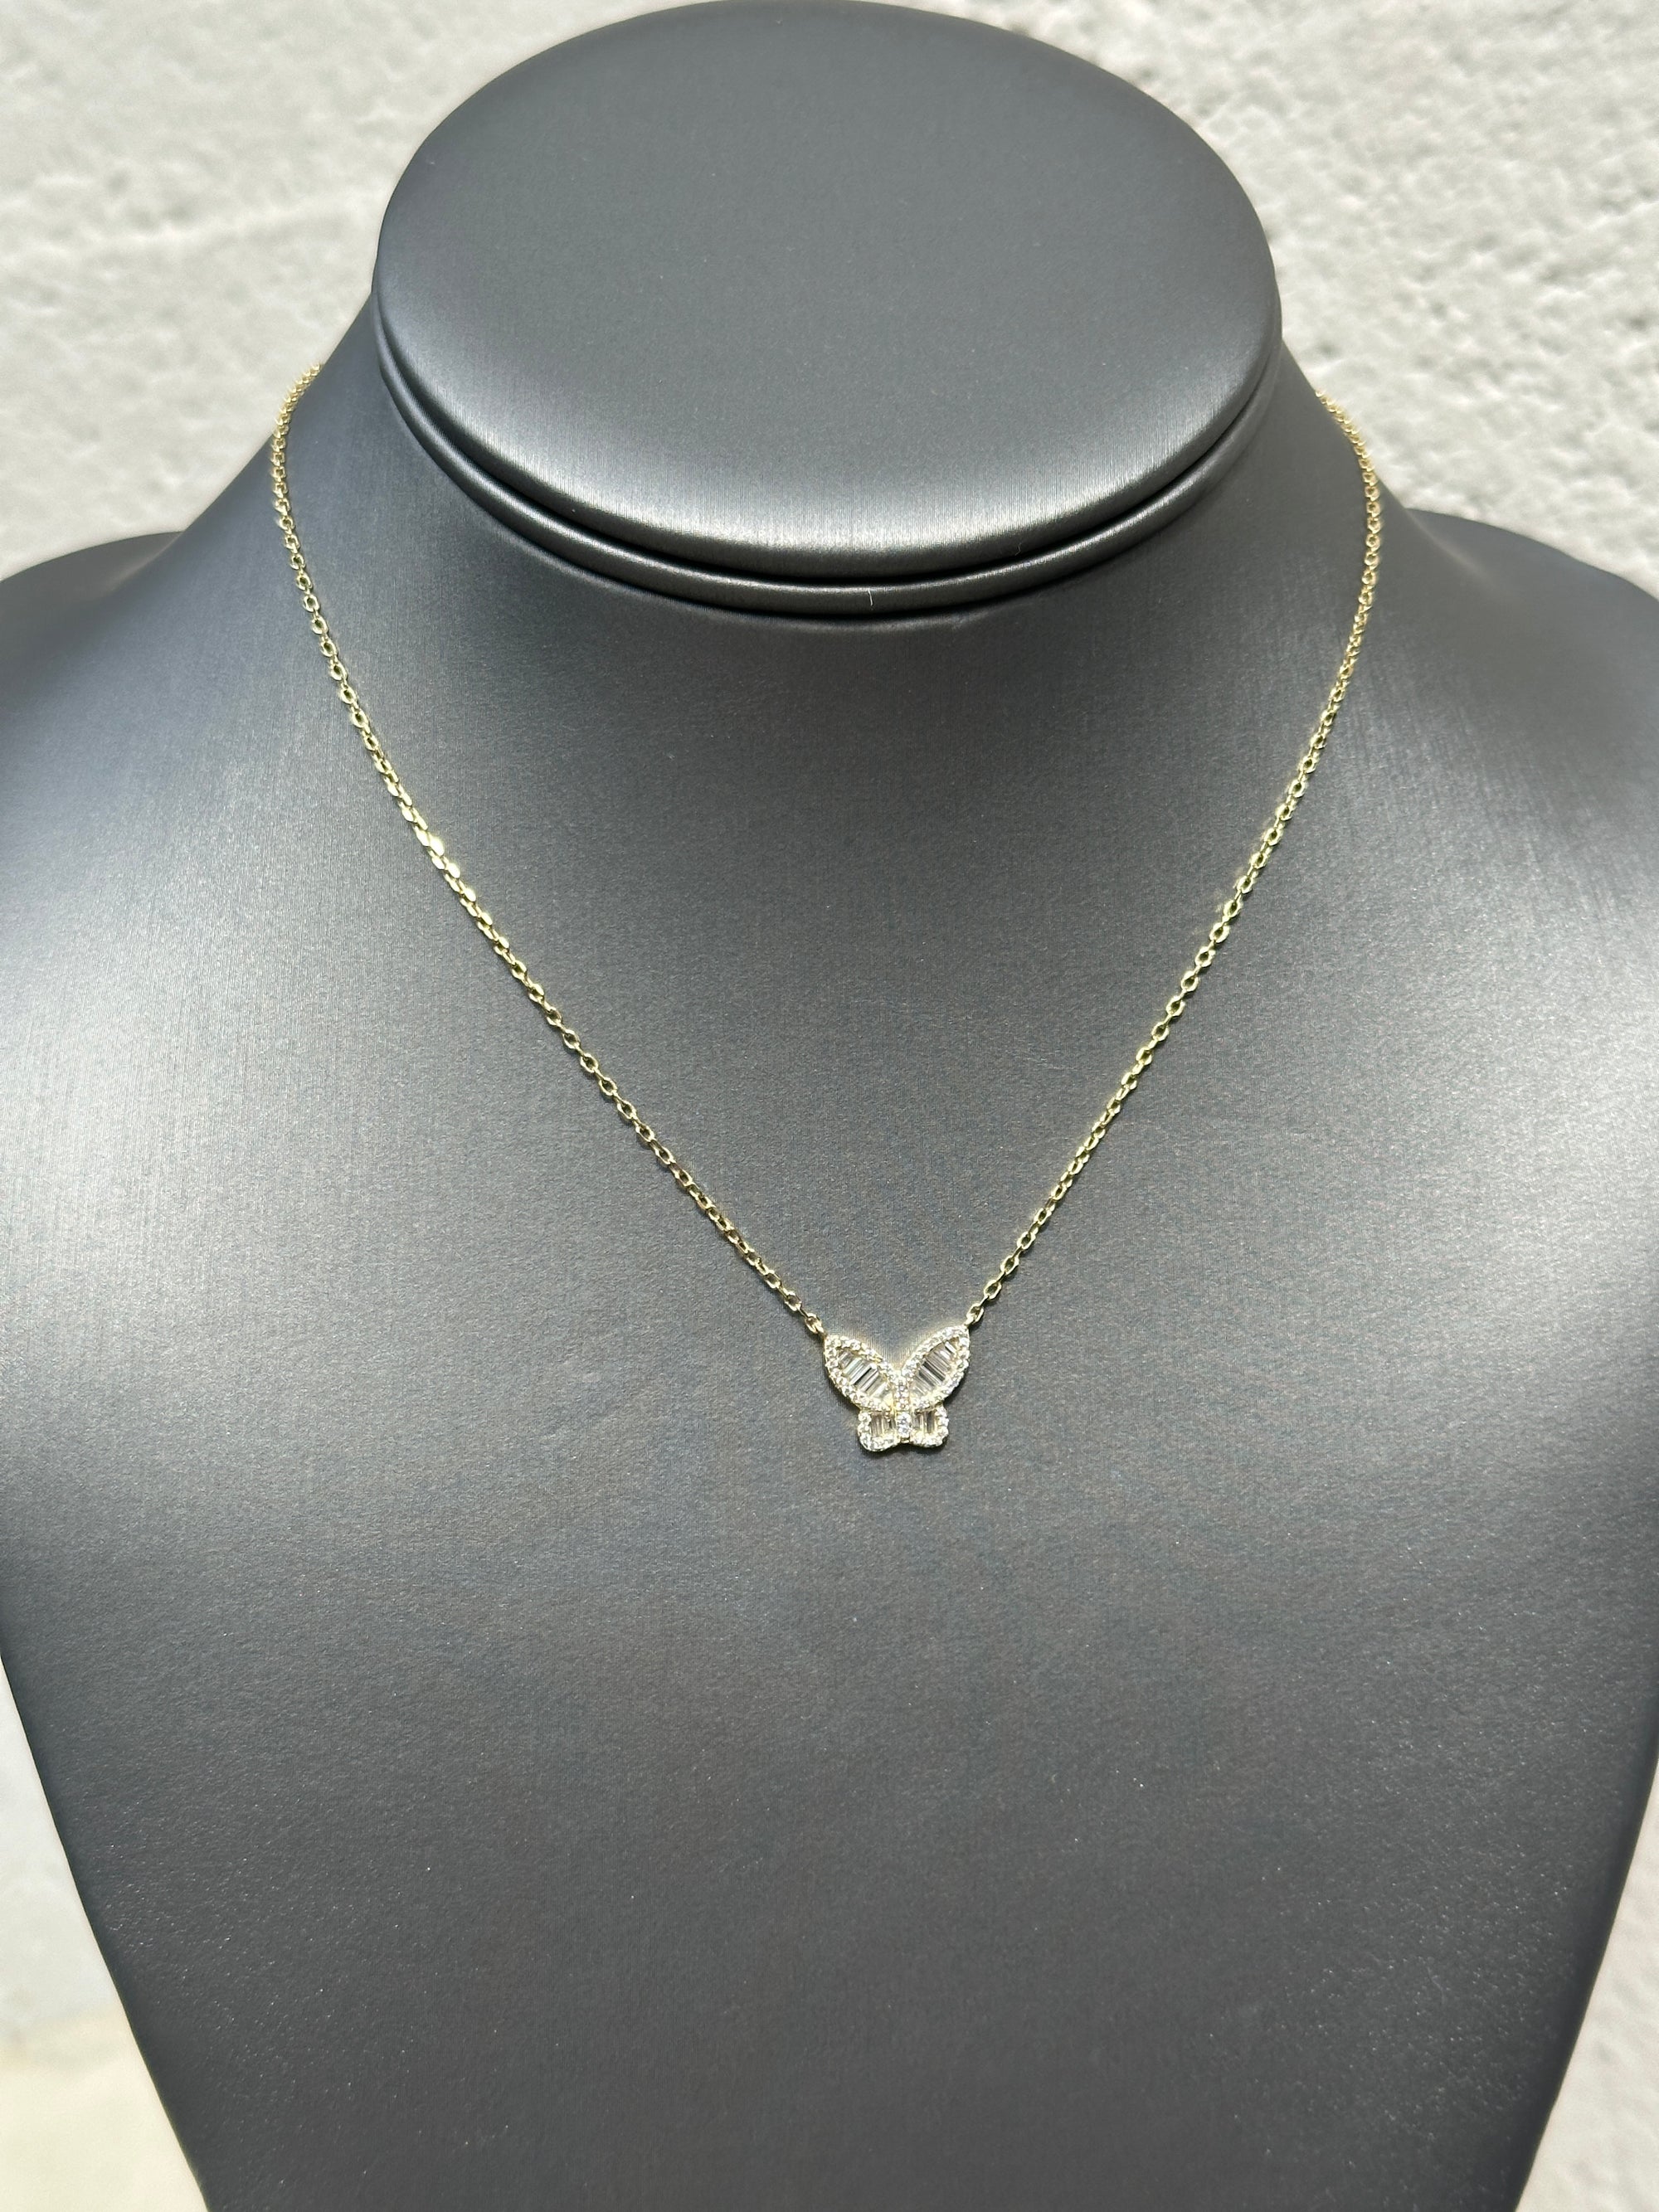 Baguette Butterfly Necklace